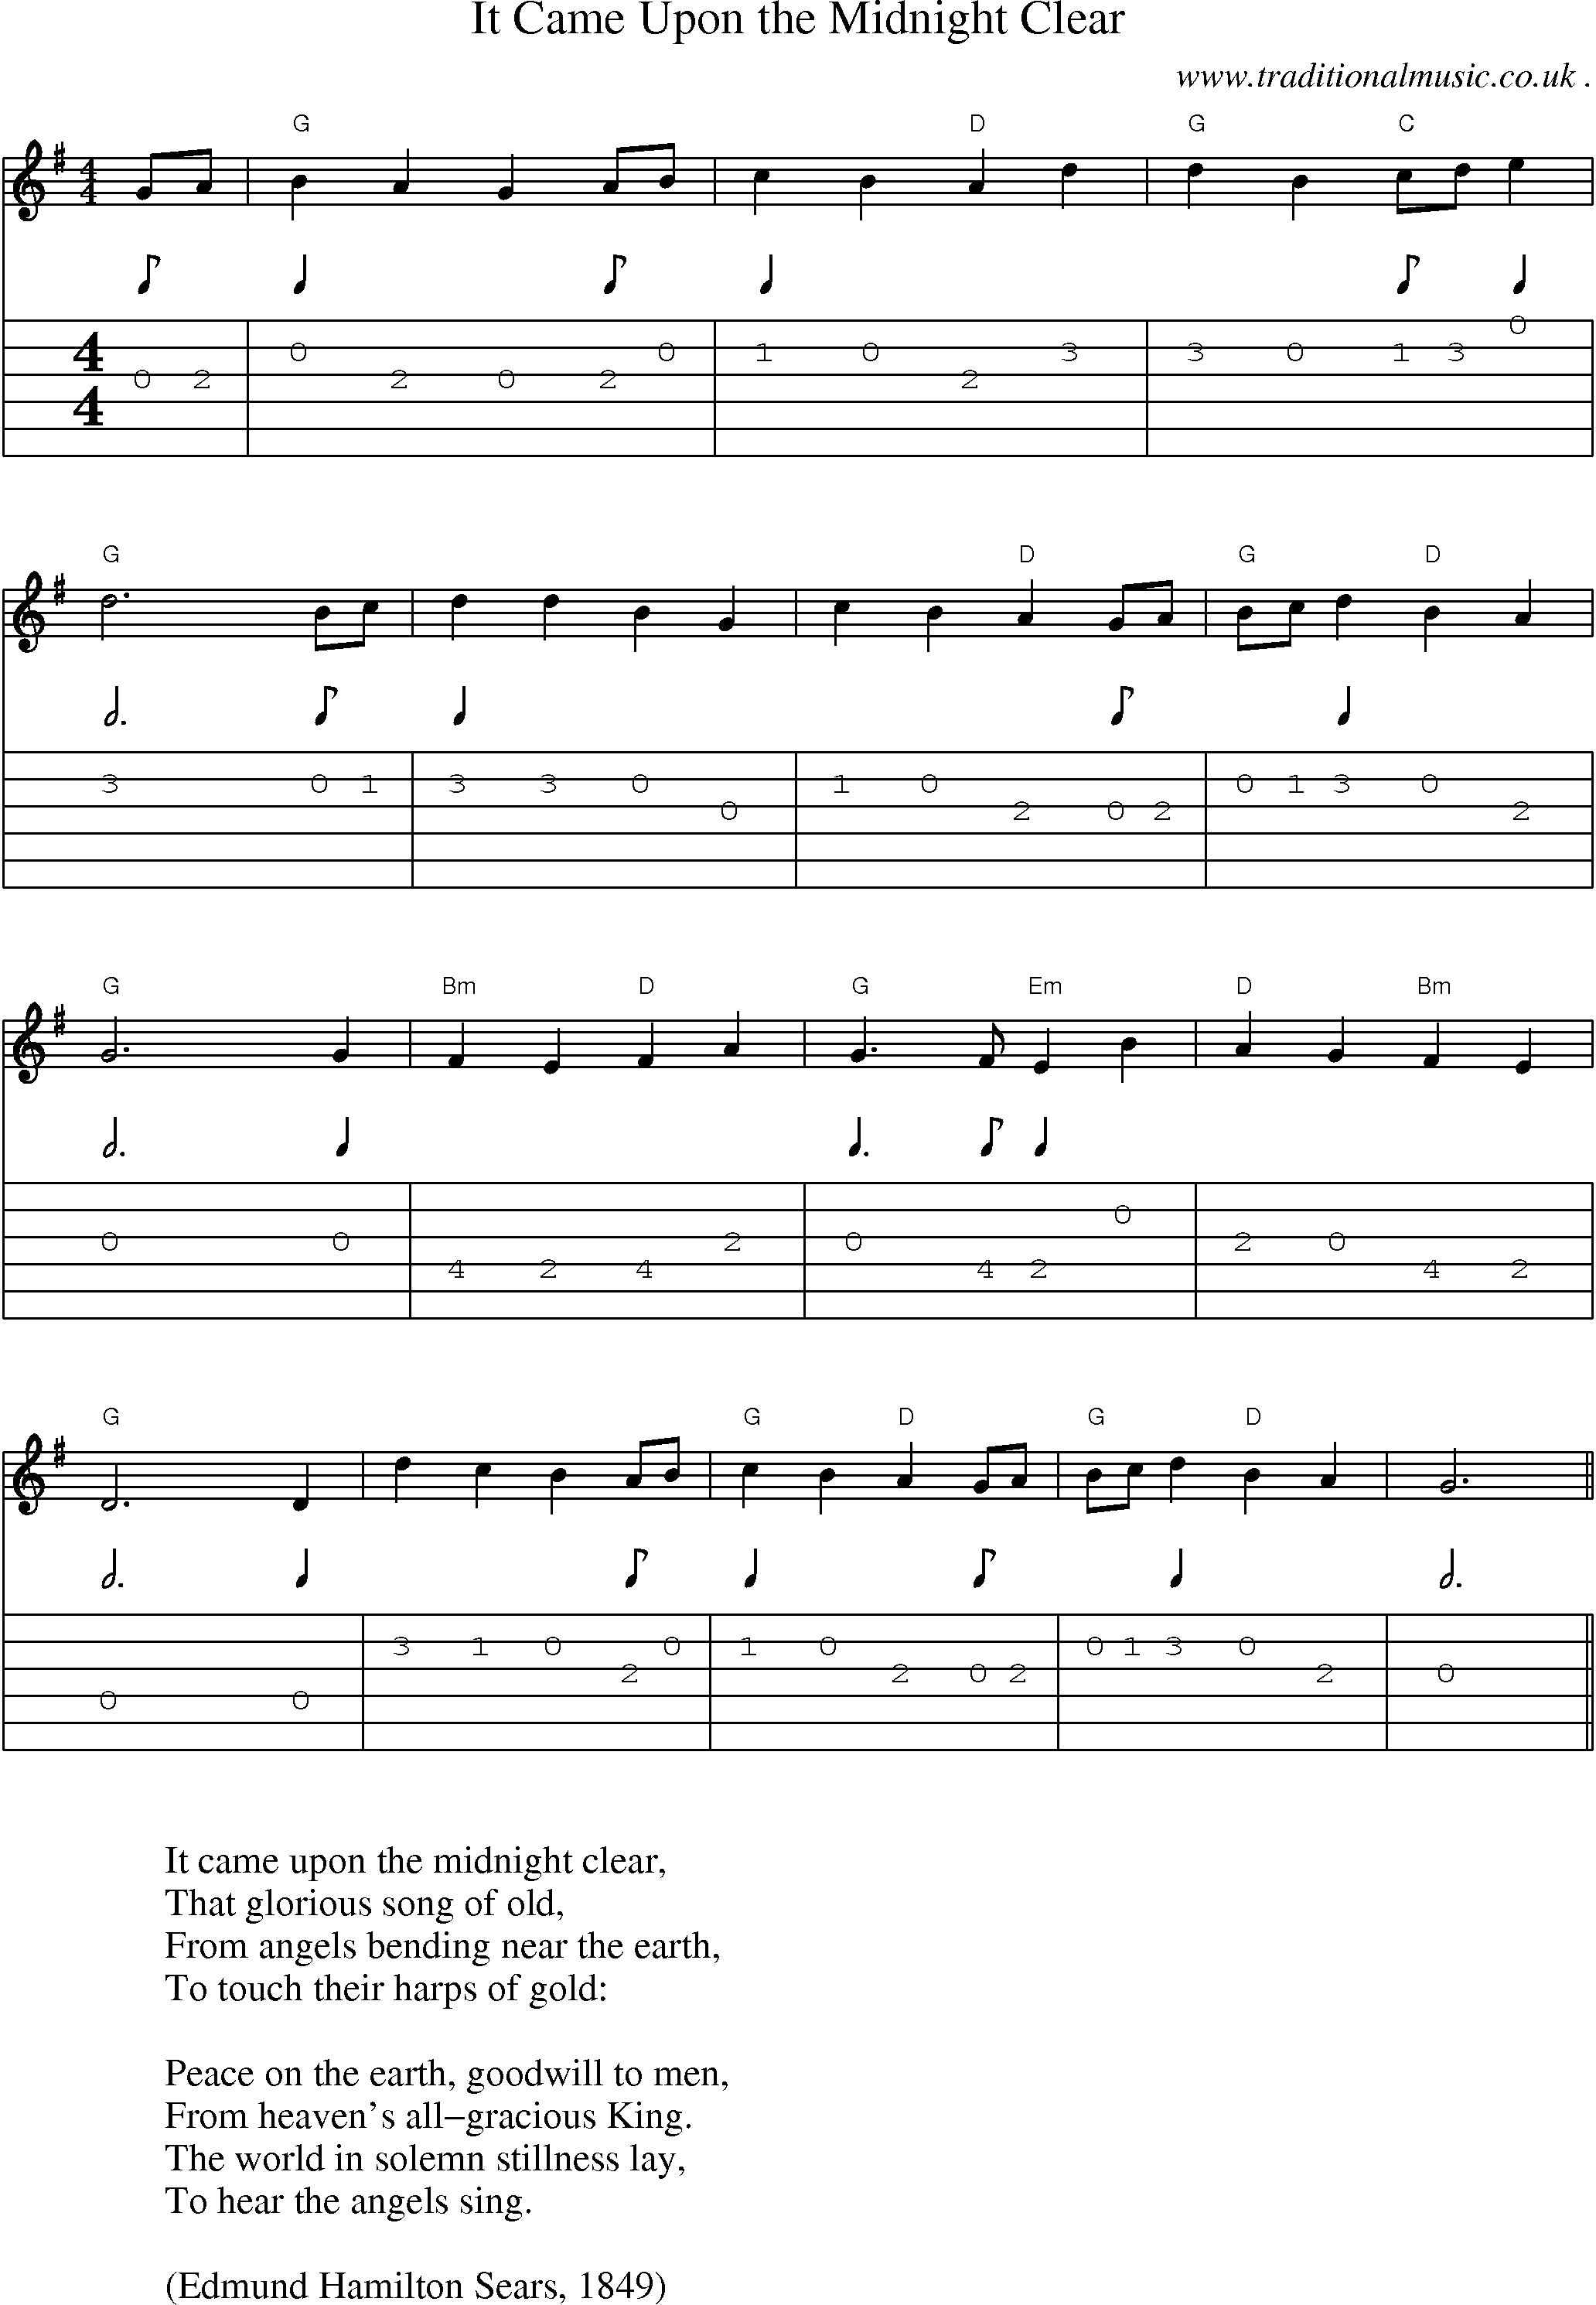 Music Score and Guitar Tabs for It Came Upon the Midnight Clear